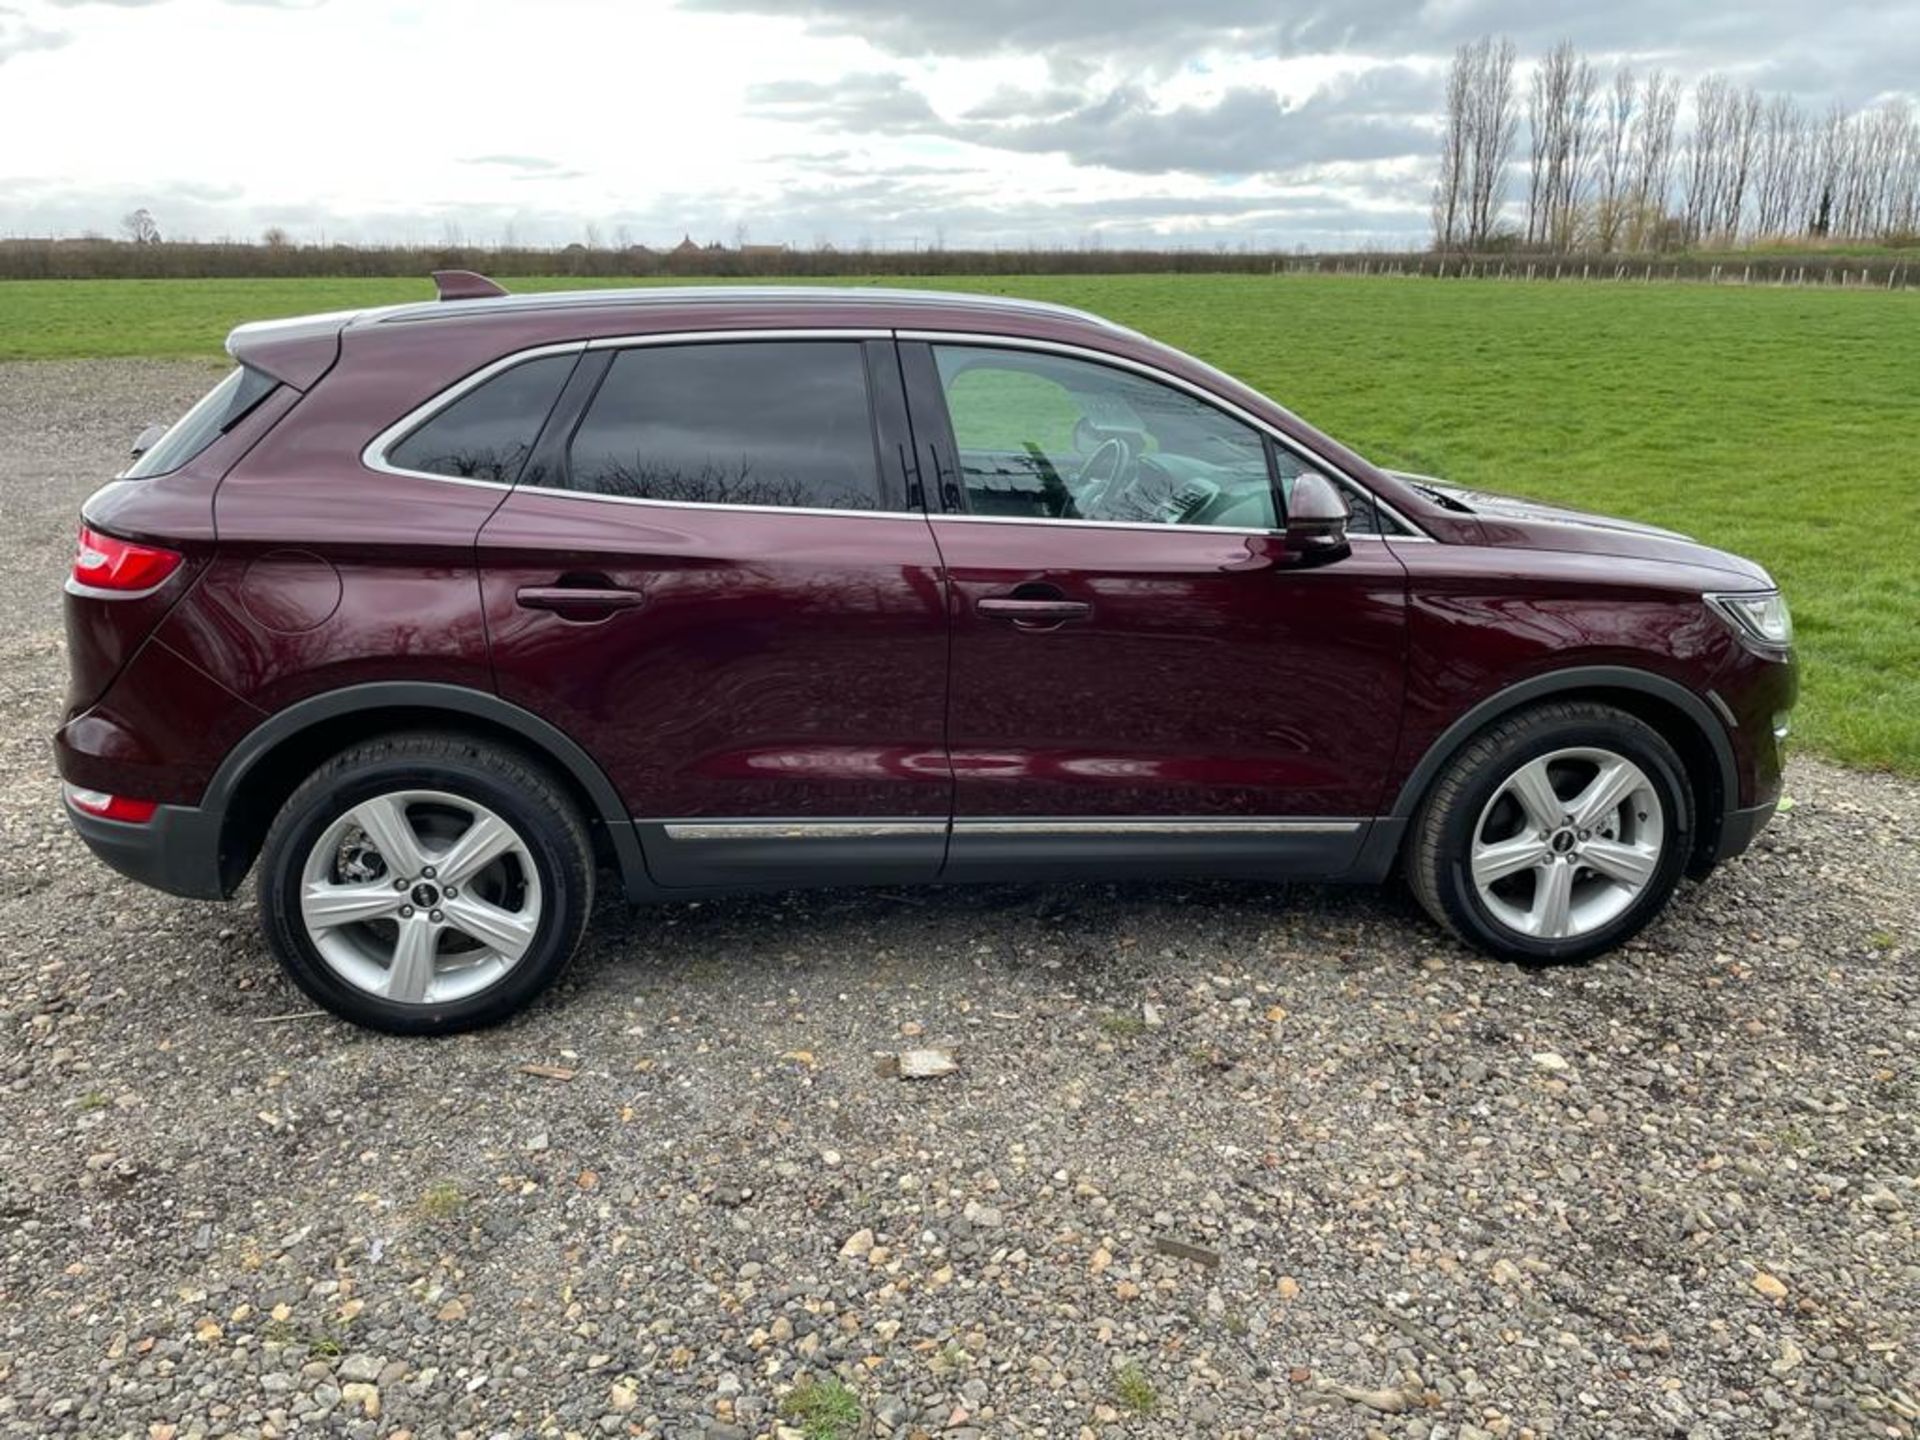 69 PLATE, PRE-REGISTERED 2017MY, LINCOLN MKC PREMIER 2.0L TURBO PETROL ECOBOOST (200bhp) AUTOMATIC - Image 8 of 14